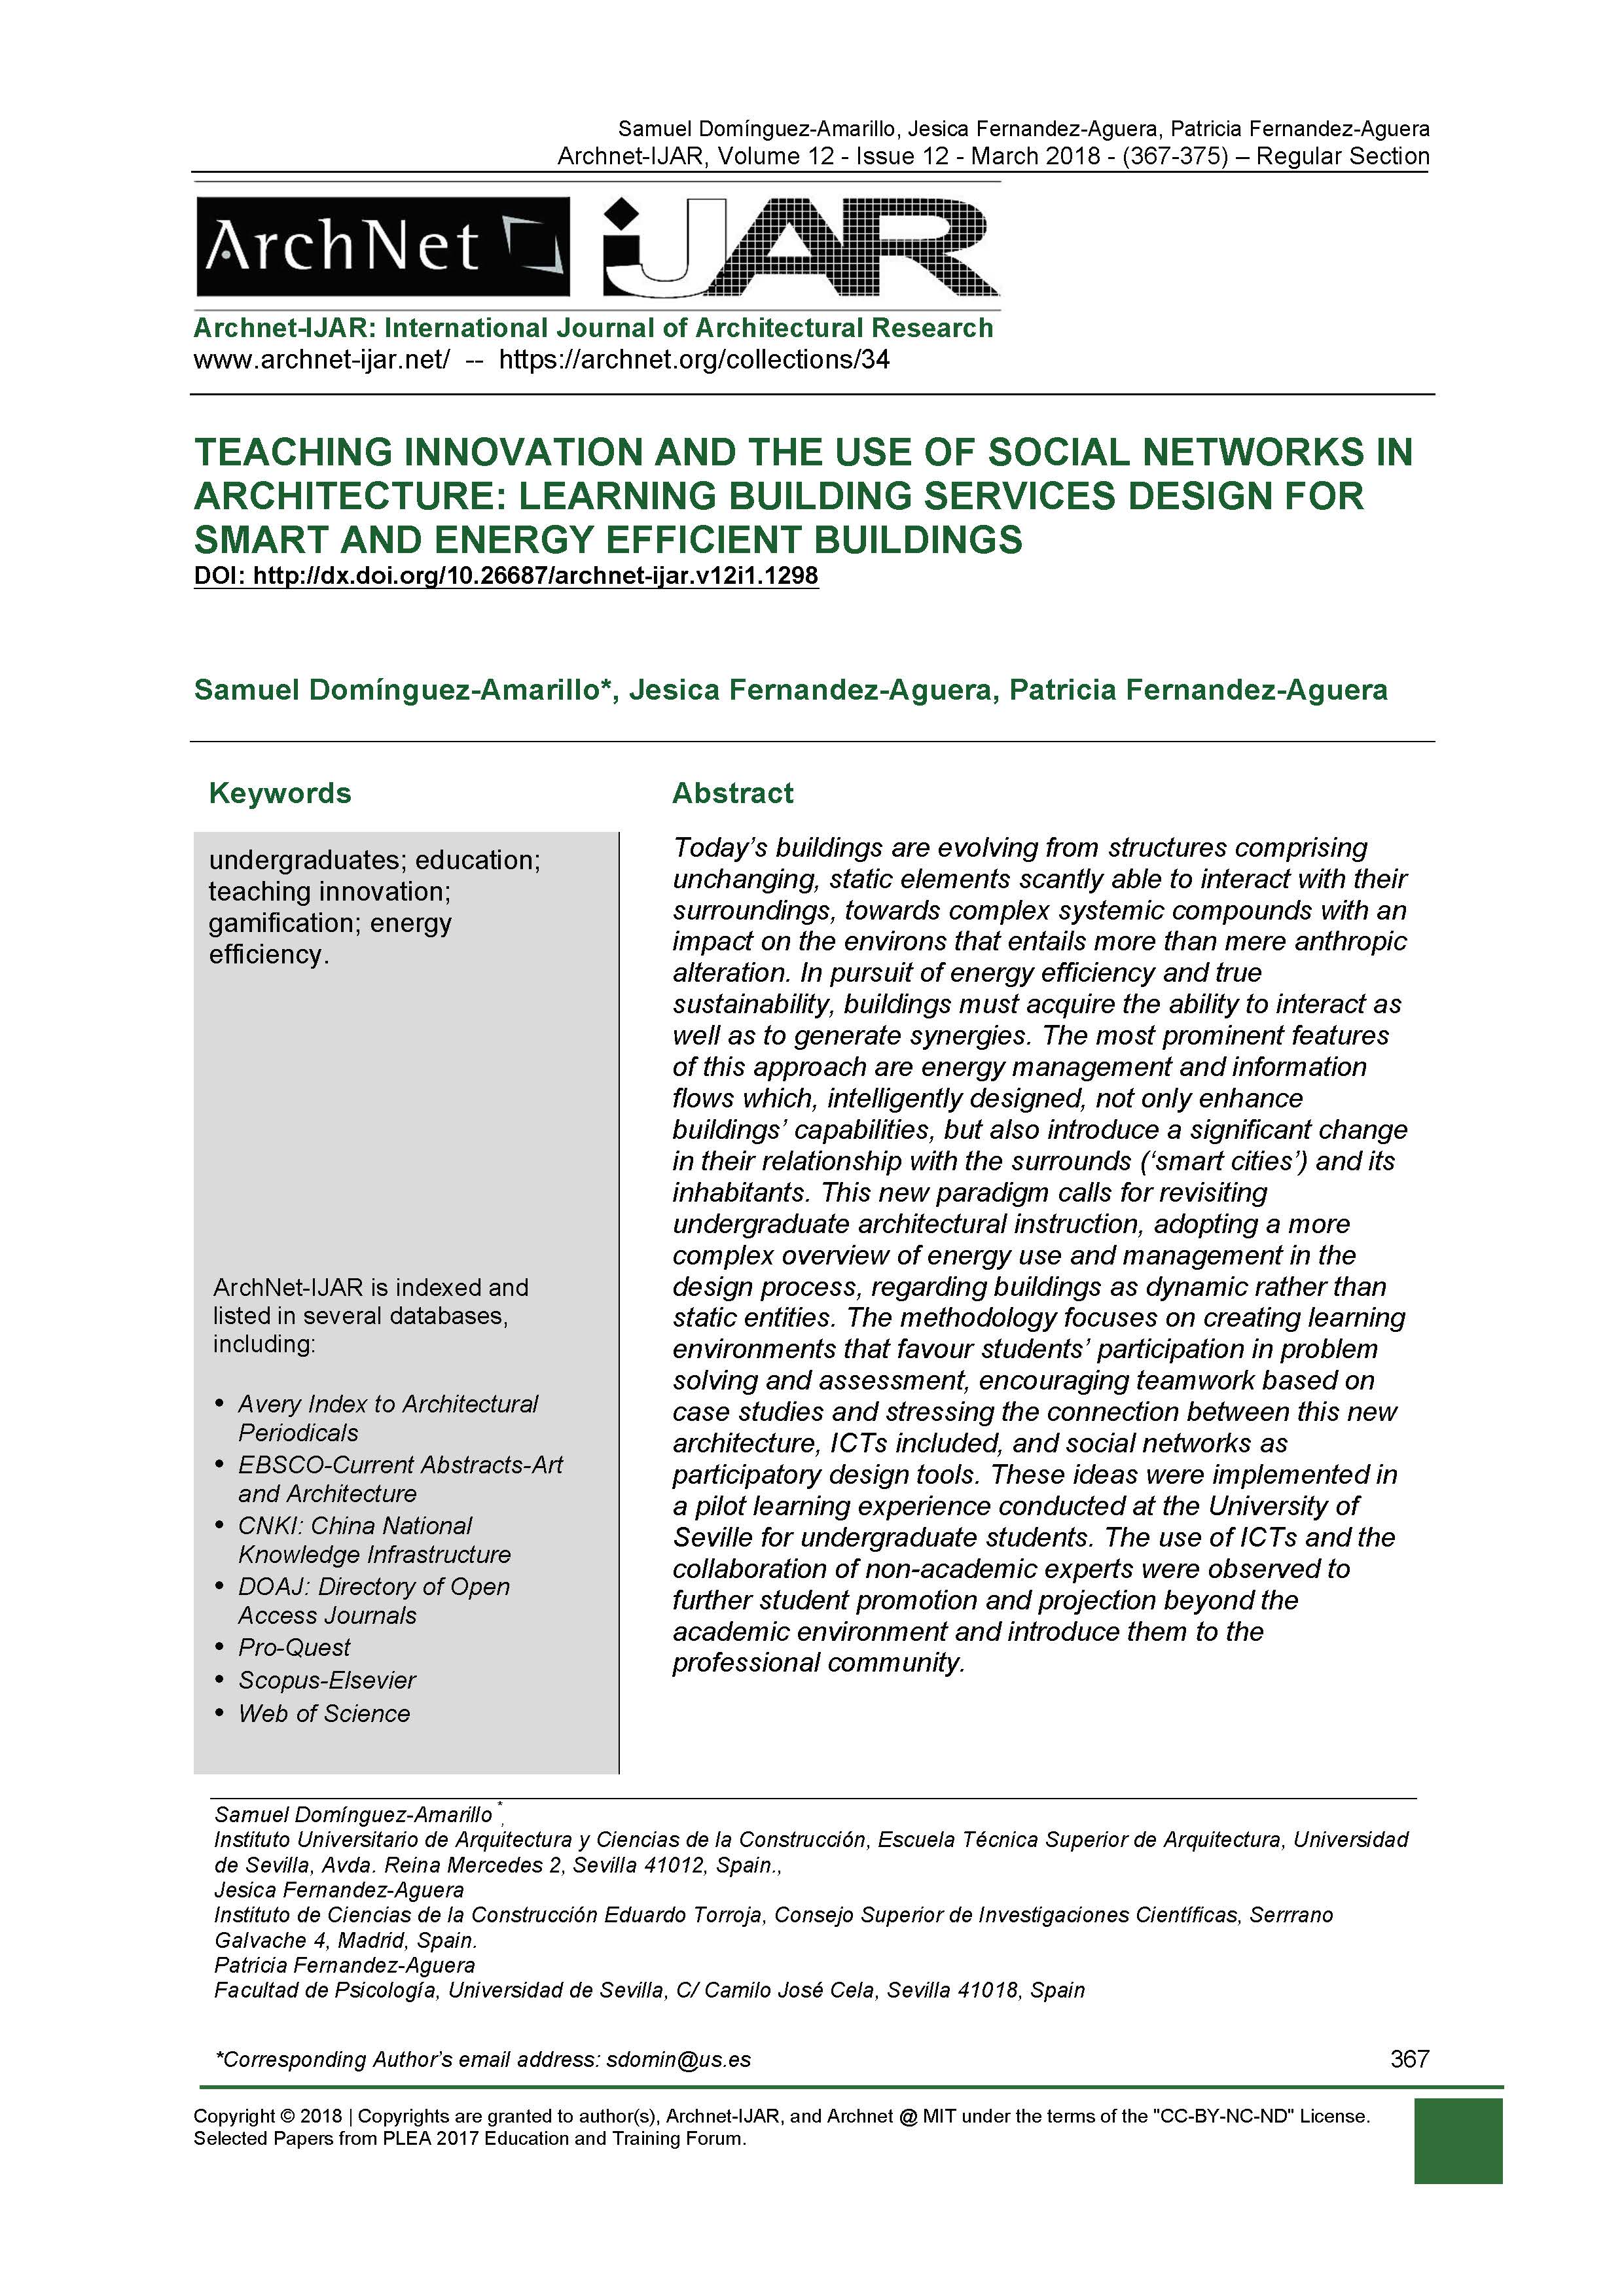 Teaching Innovation and the Use of Social Networks in Architecture: Learning Building Services Design for Smart and Energy Efficient Buildings